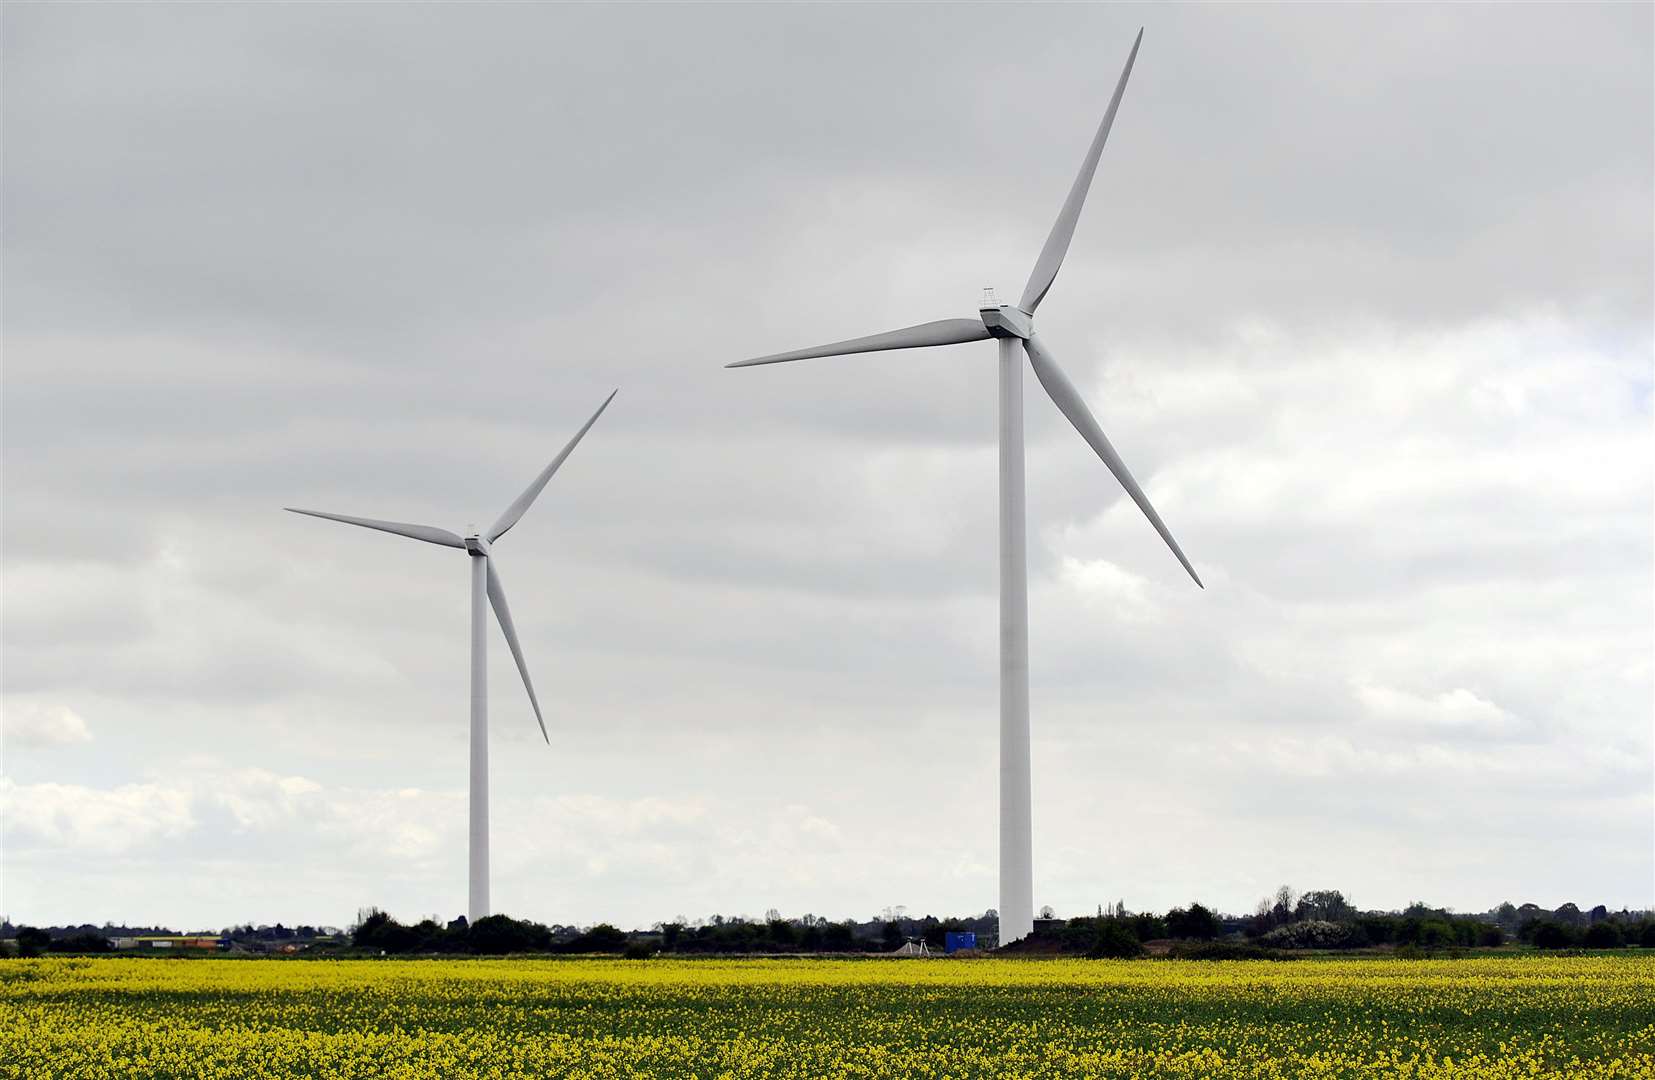 Developers have warned that new wind farms are being held up by the slow expansion of the grid (Nicholas.T.Ansell/PA)